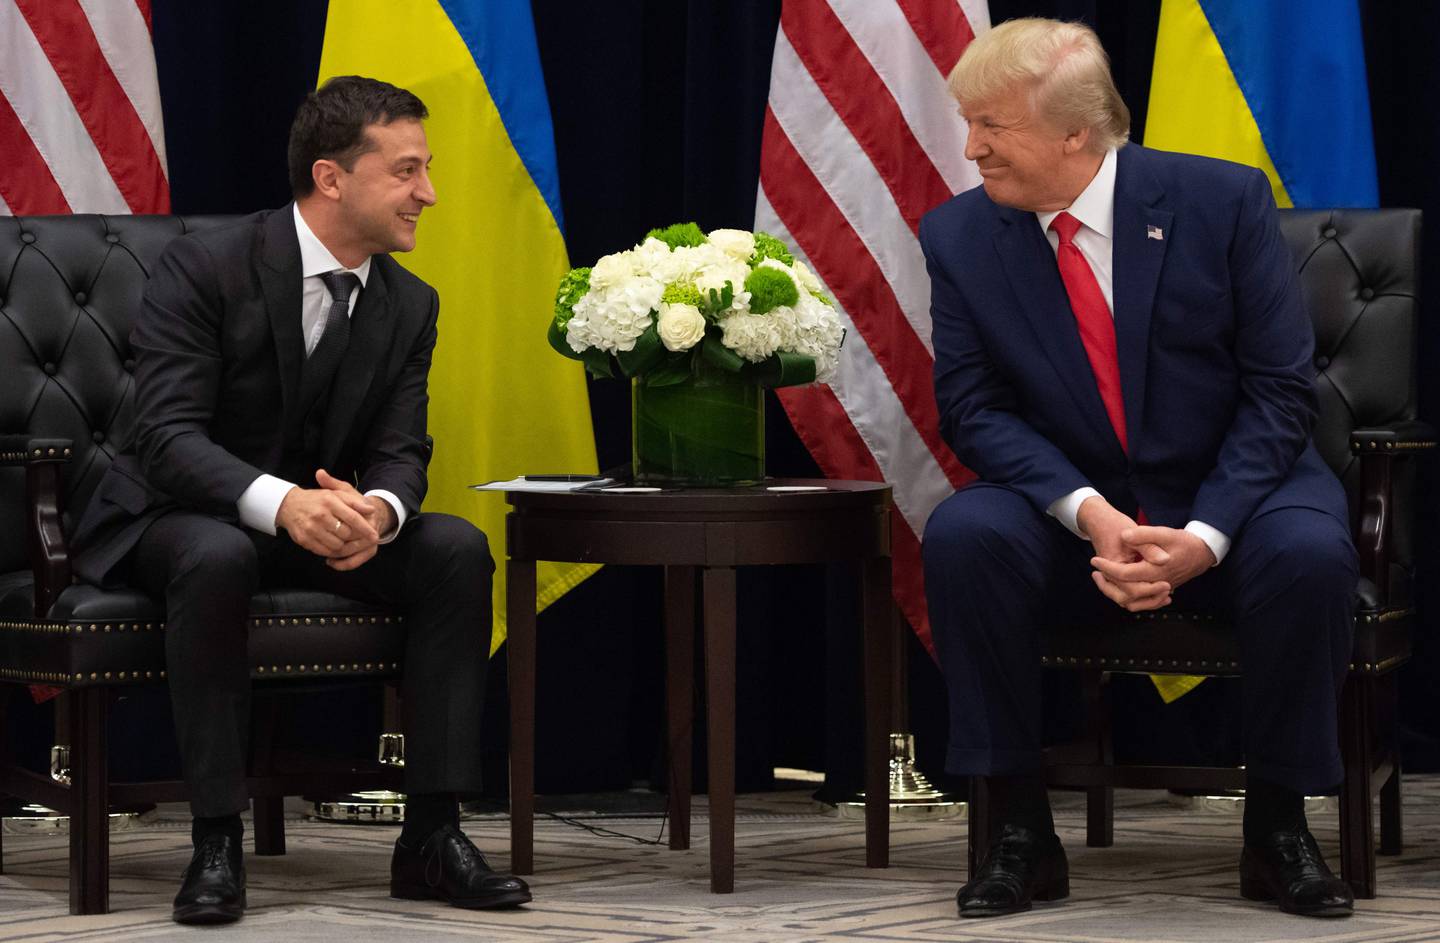 (FILES) In this file photo taken on September 25, 2019 US President Donald Trump and Ukrainian President Volodymyr Zelensky speak during a meeting in New York 
on the sidelines of the United Nations General Assembly. Donald Trump faces the prospect of becoming only the third US president to be impeached when open hearings begin this week into his alleged effort to bolster his re-election hopes by pushing Ukraine to find dirt on a Democratic rival. / AFP / SAUL LOEB
